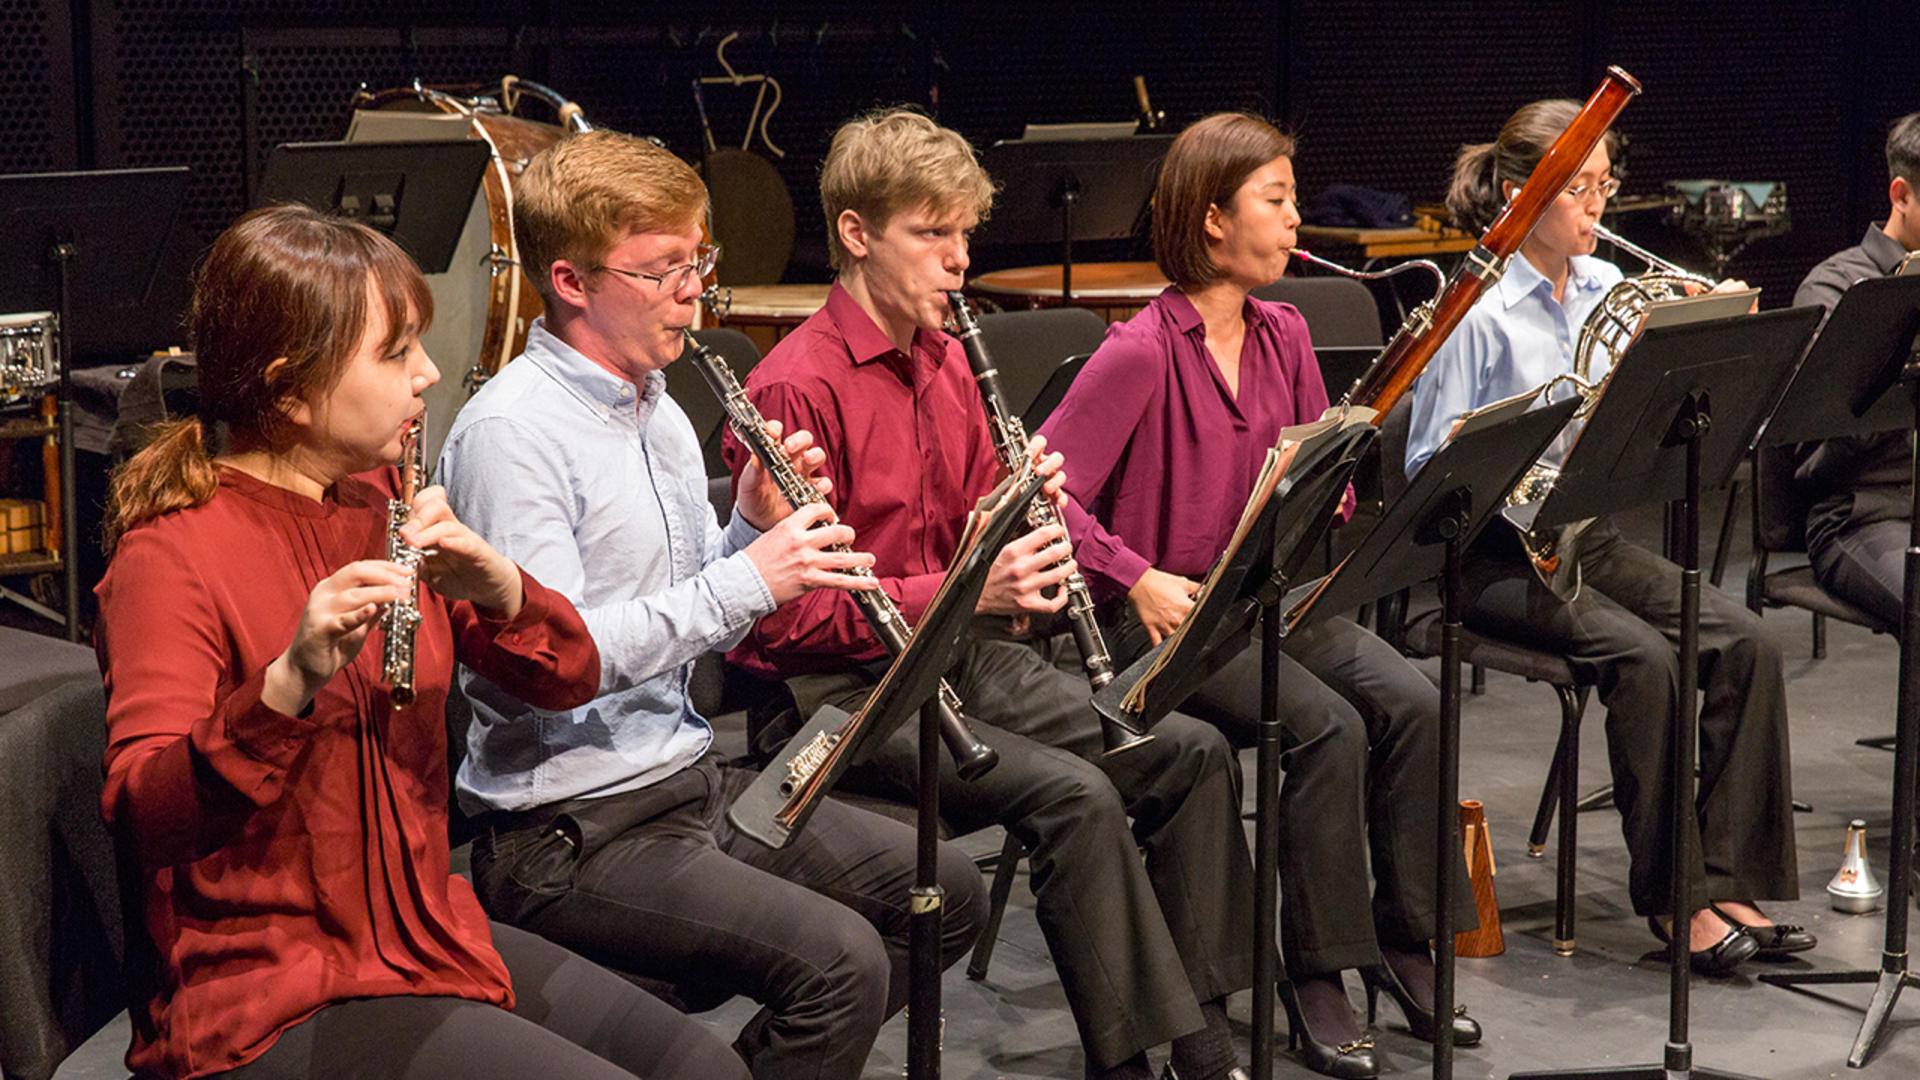 Wednesdays at One: Juilliard Wind Orchestra, at Alice Tully Hall at Lincoln Center